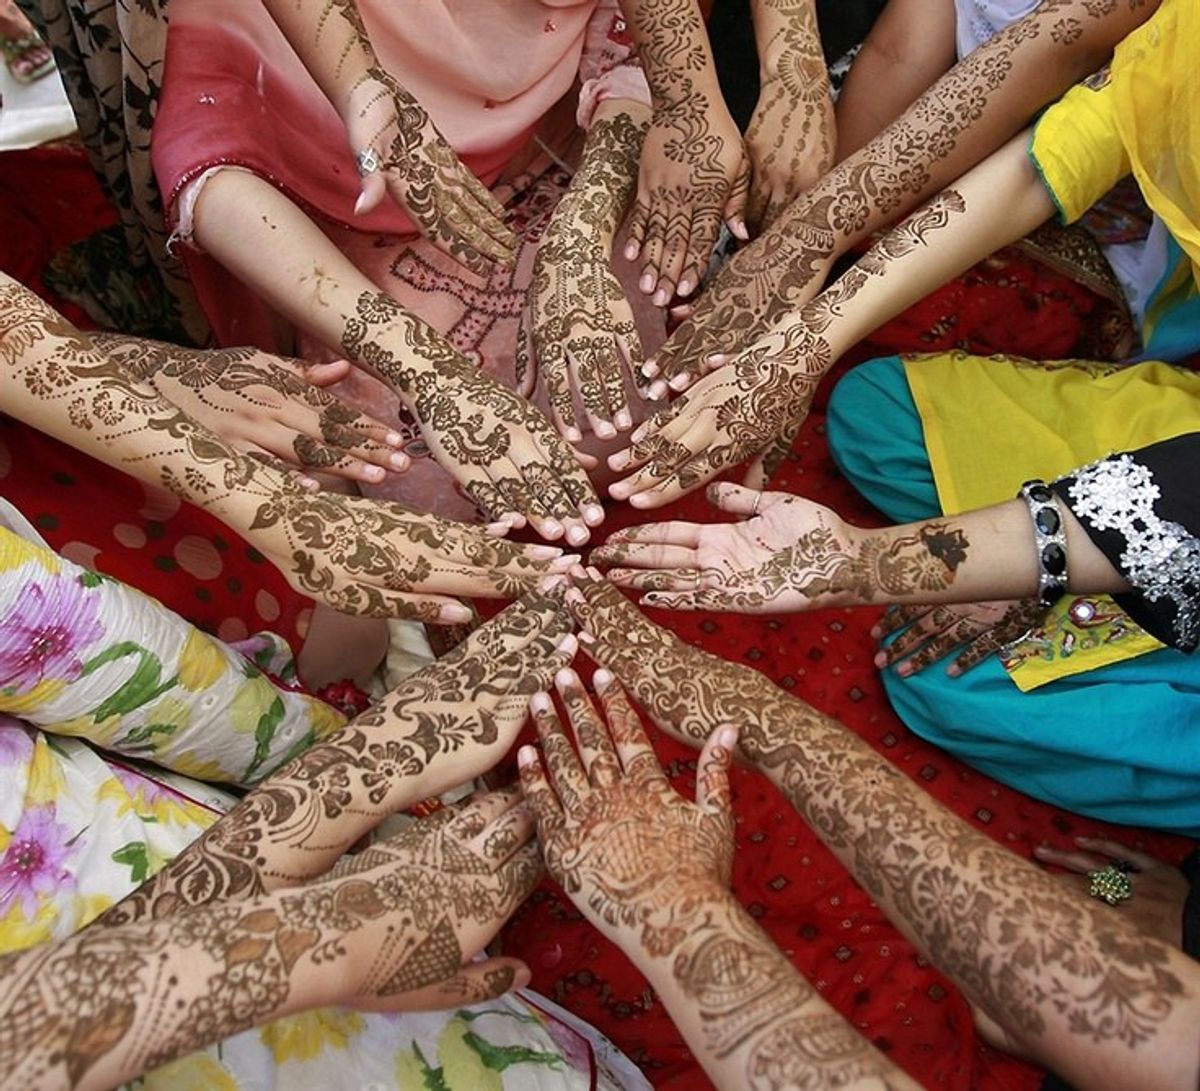 9 Things You Think When Putting Henna On Others